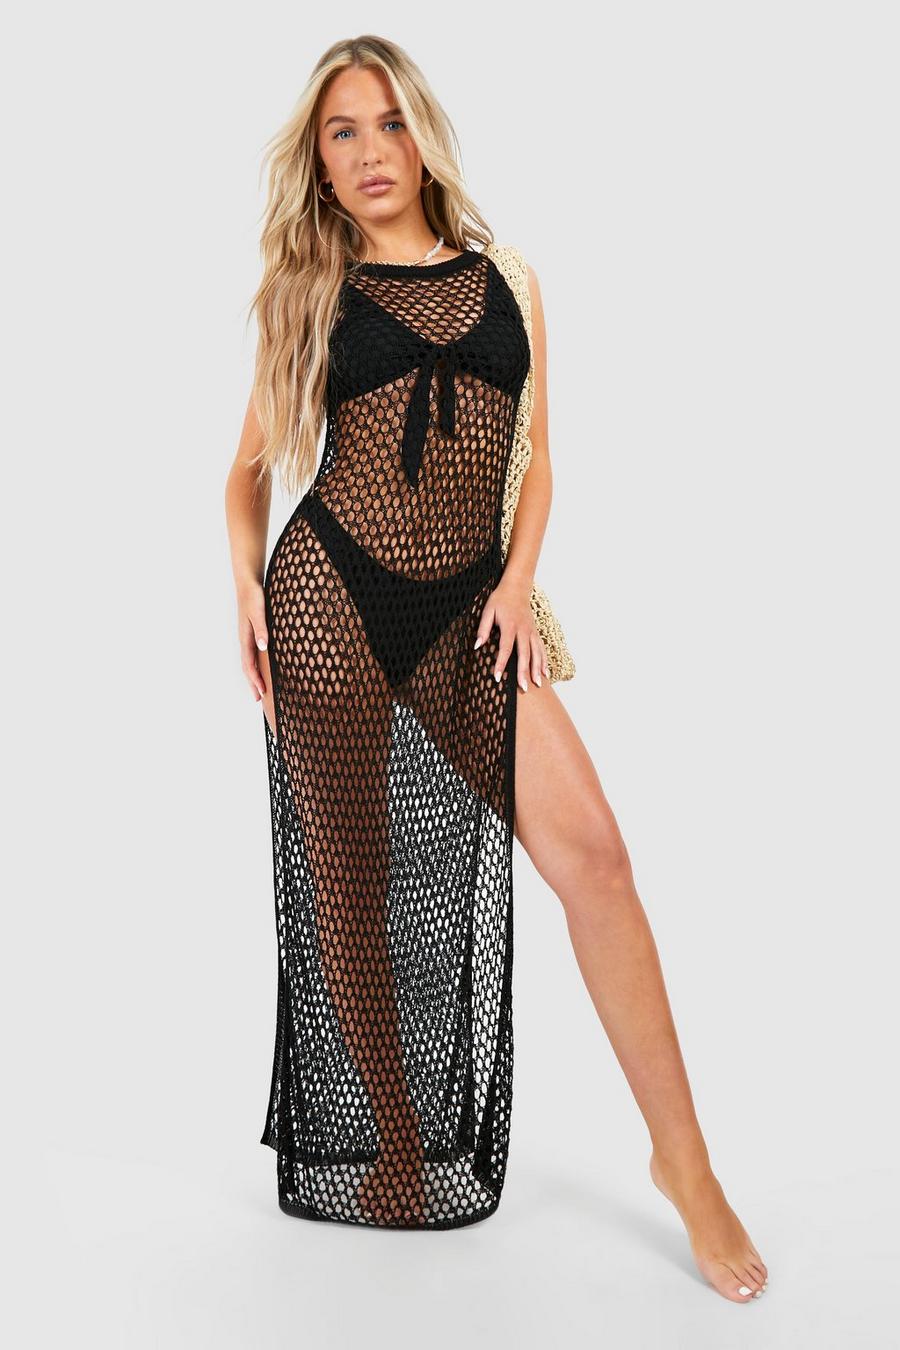 Black Crochet Cover-up Beach Maxi Dress image number 1